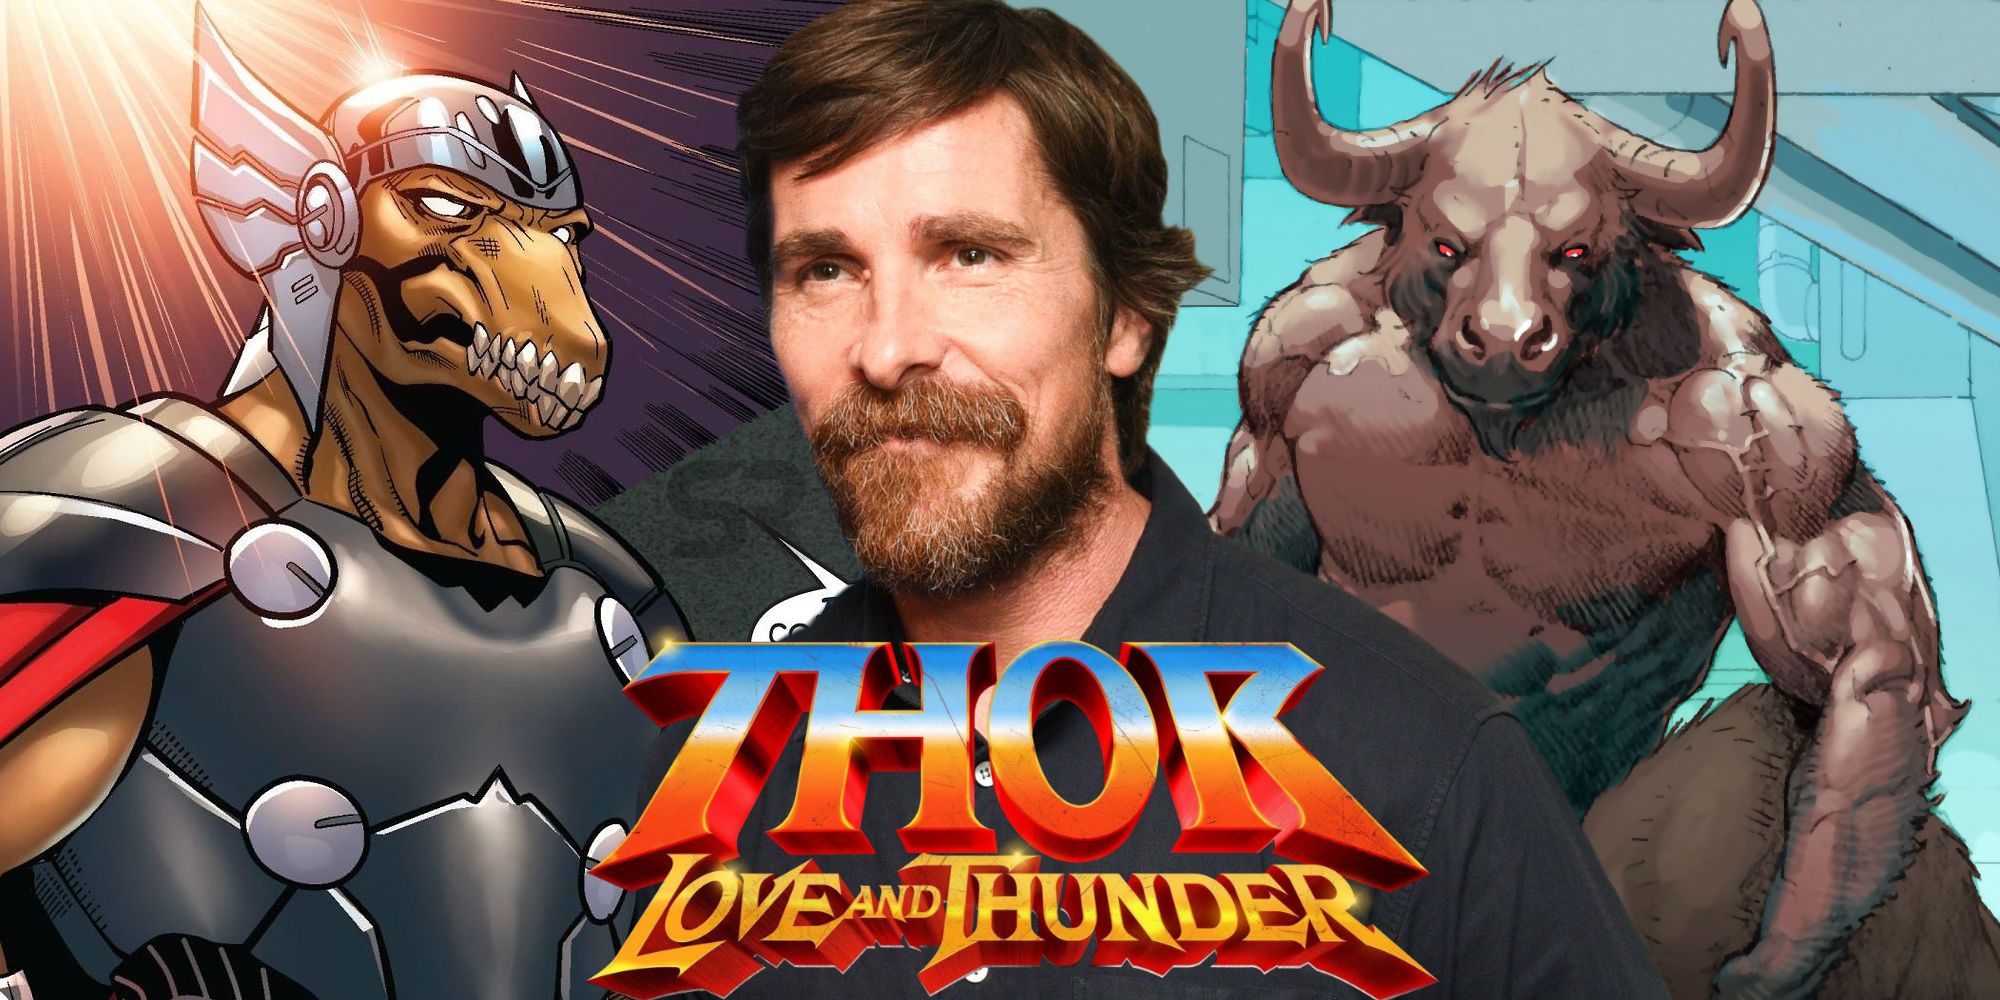 Christian Bale Thor Love and Thunder Character Speculation SR